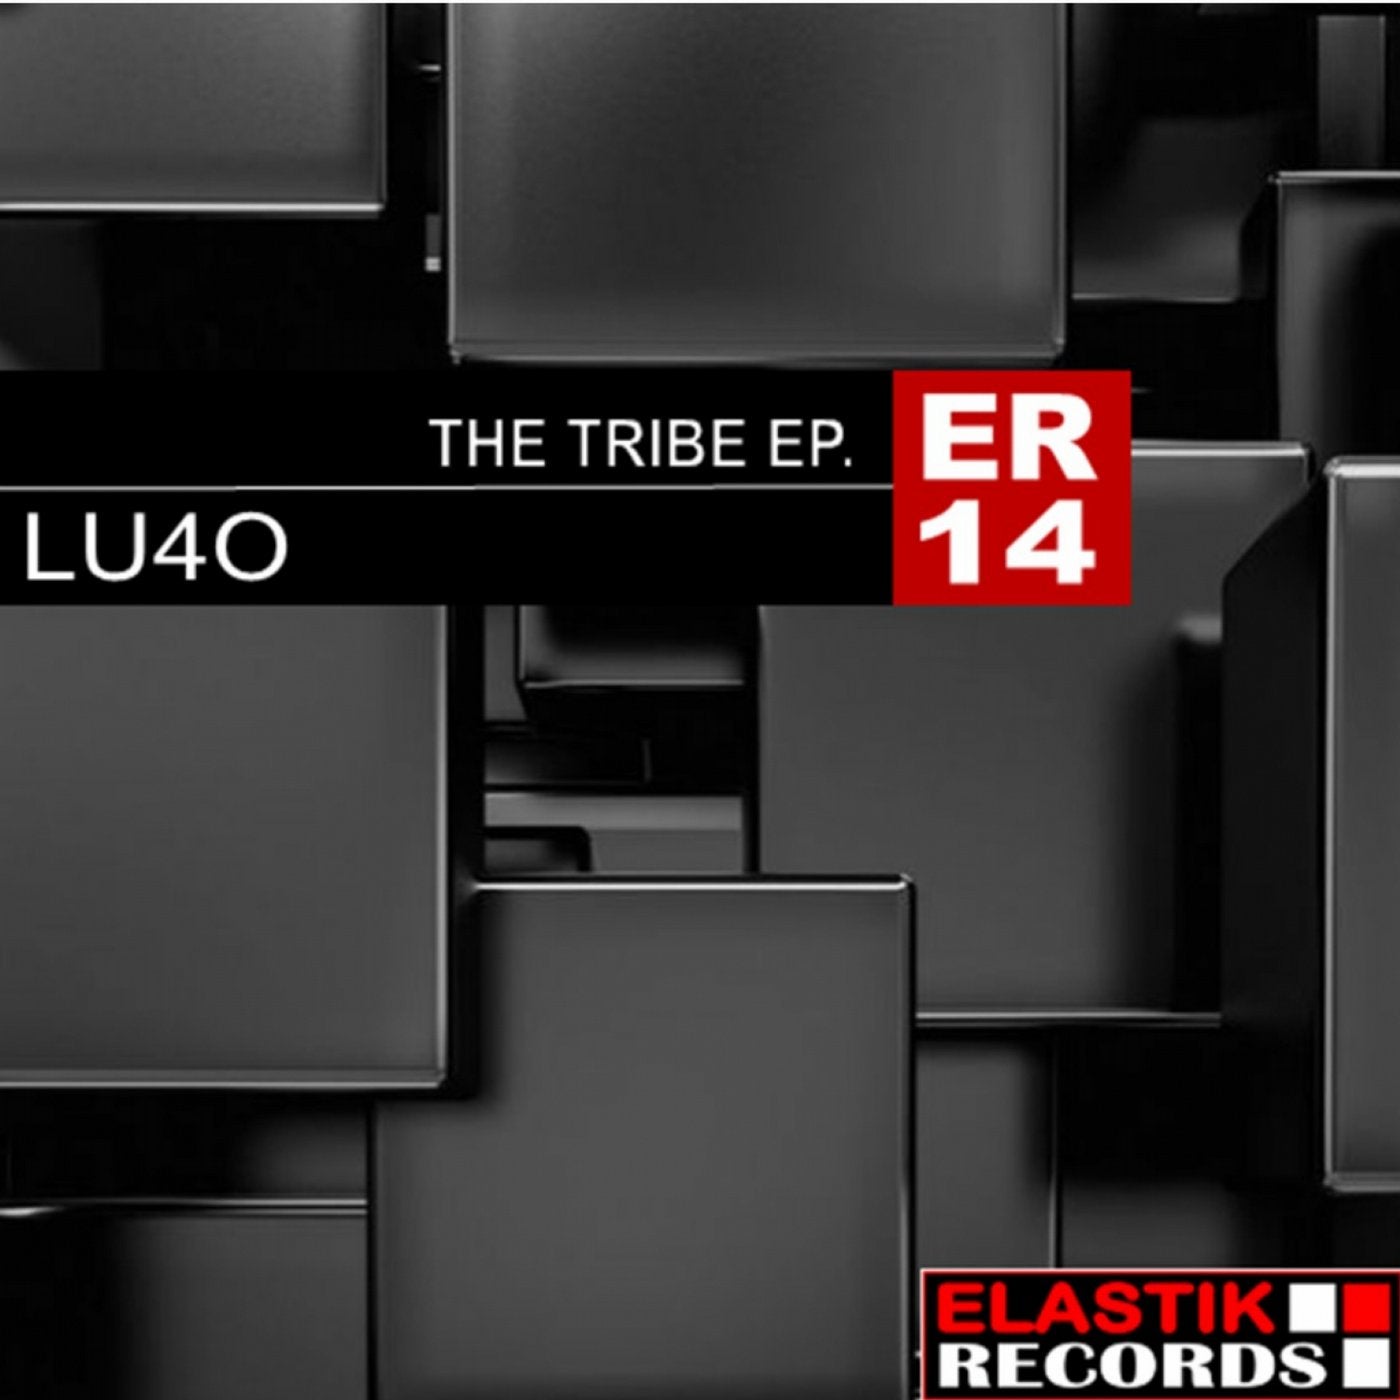 The tribe EP